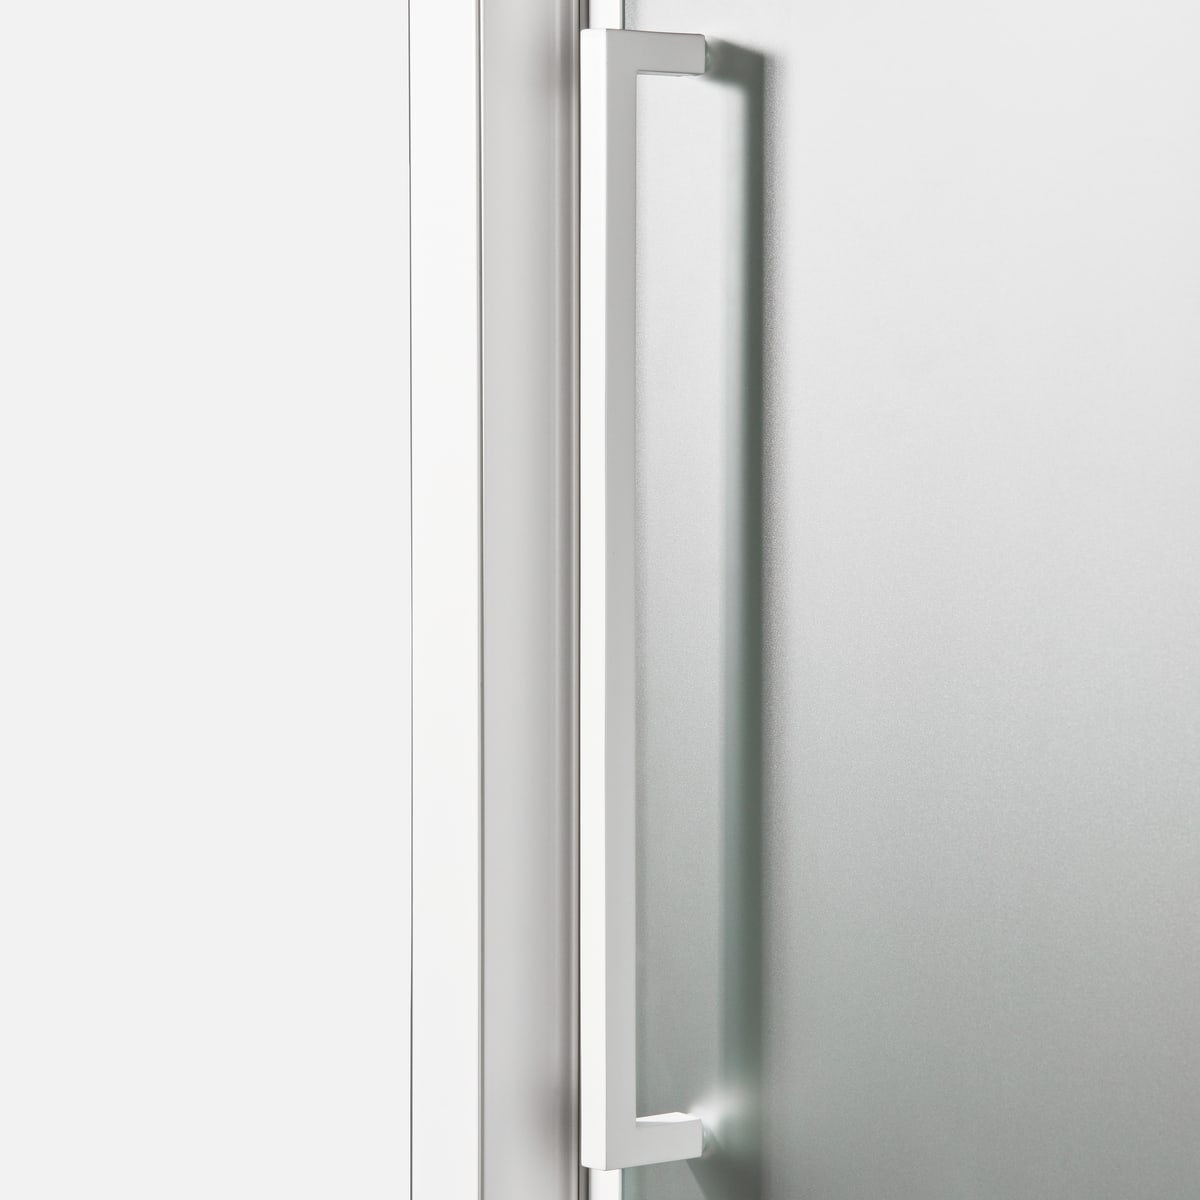 RECORD SALOON DOOR L 97-101 H 195 CM CLEAR GLASS 6 MM WHITE